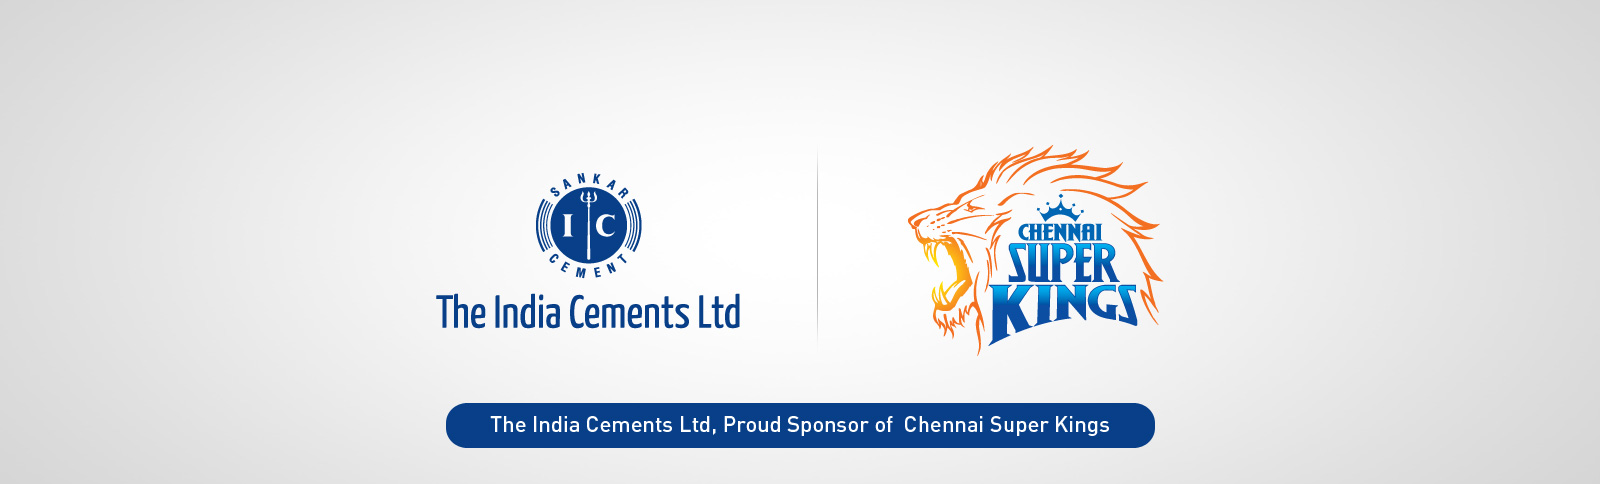 cement companies in india